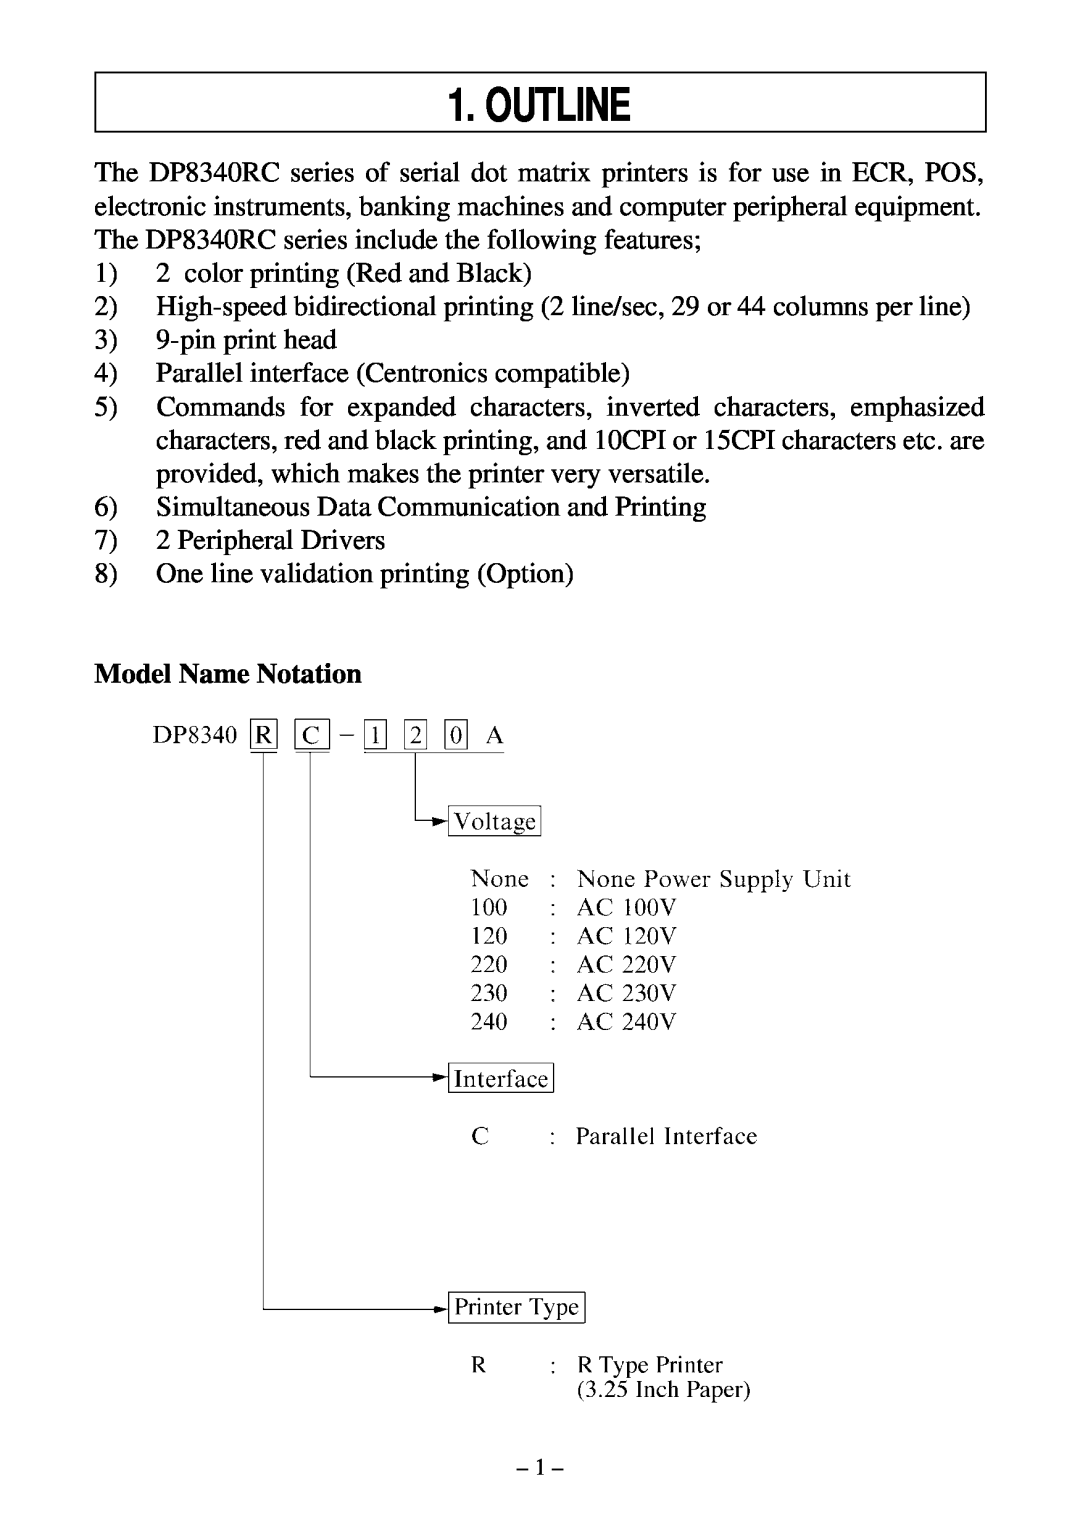 Star Micronics DP8340RC user manual Outline, Model Name Notation 